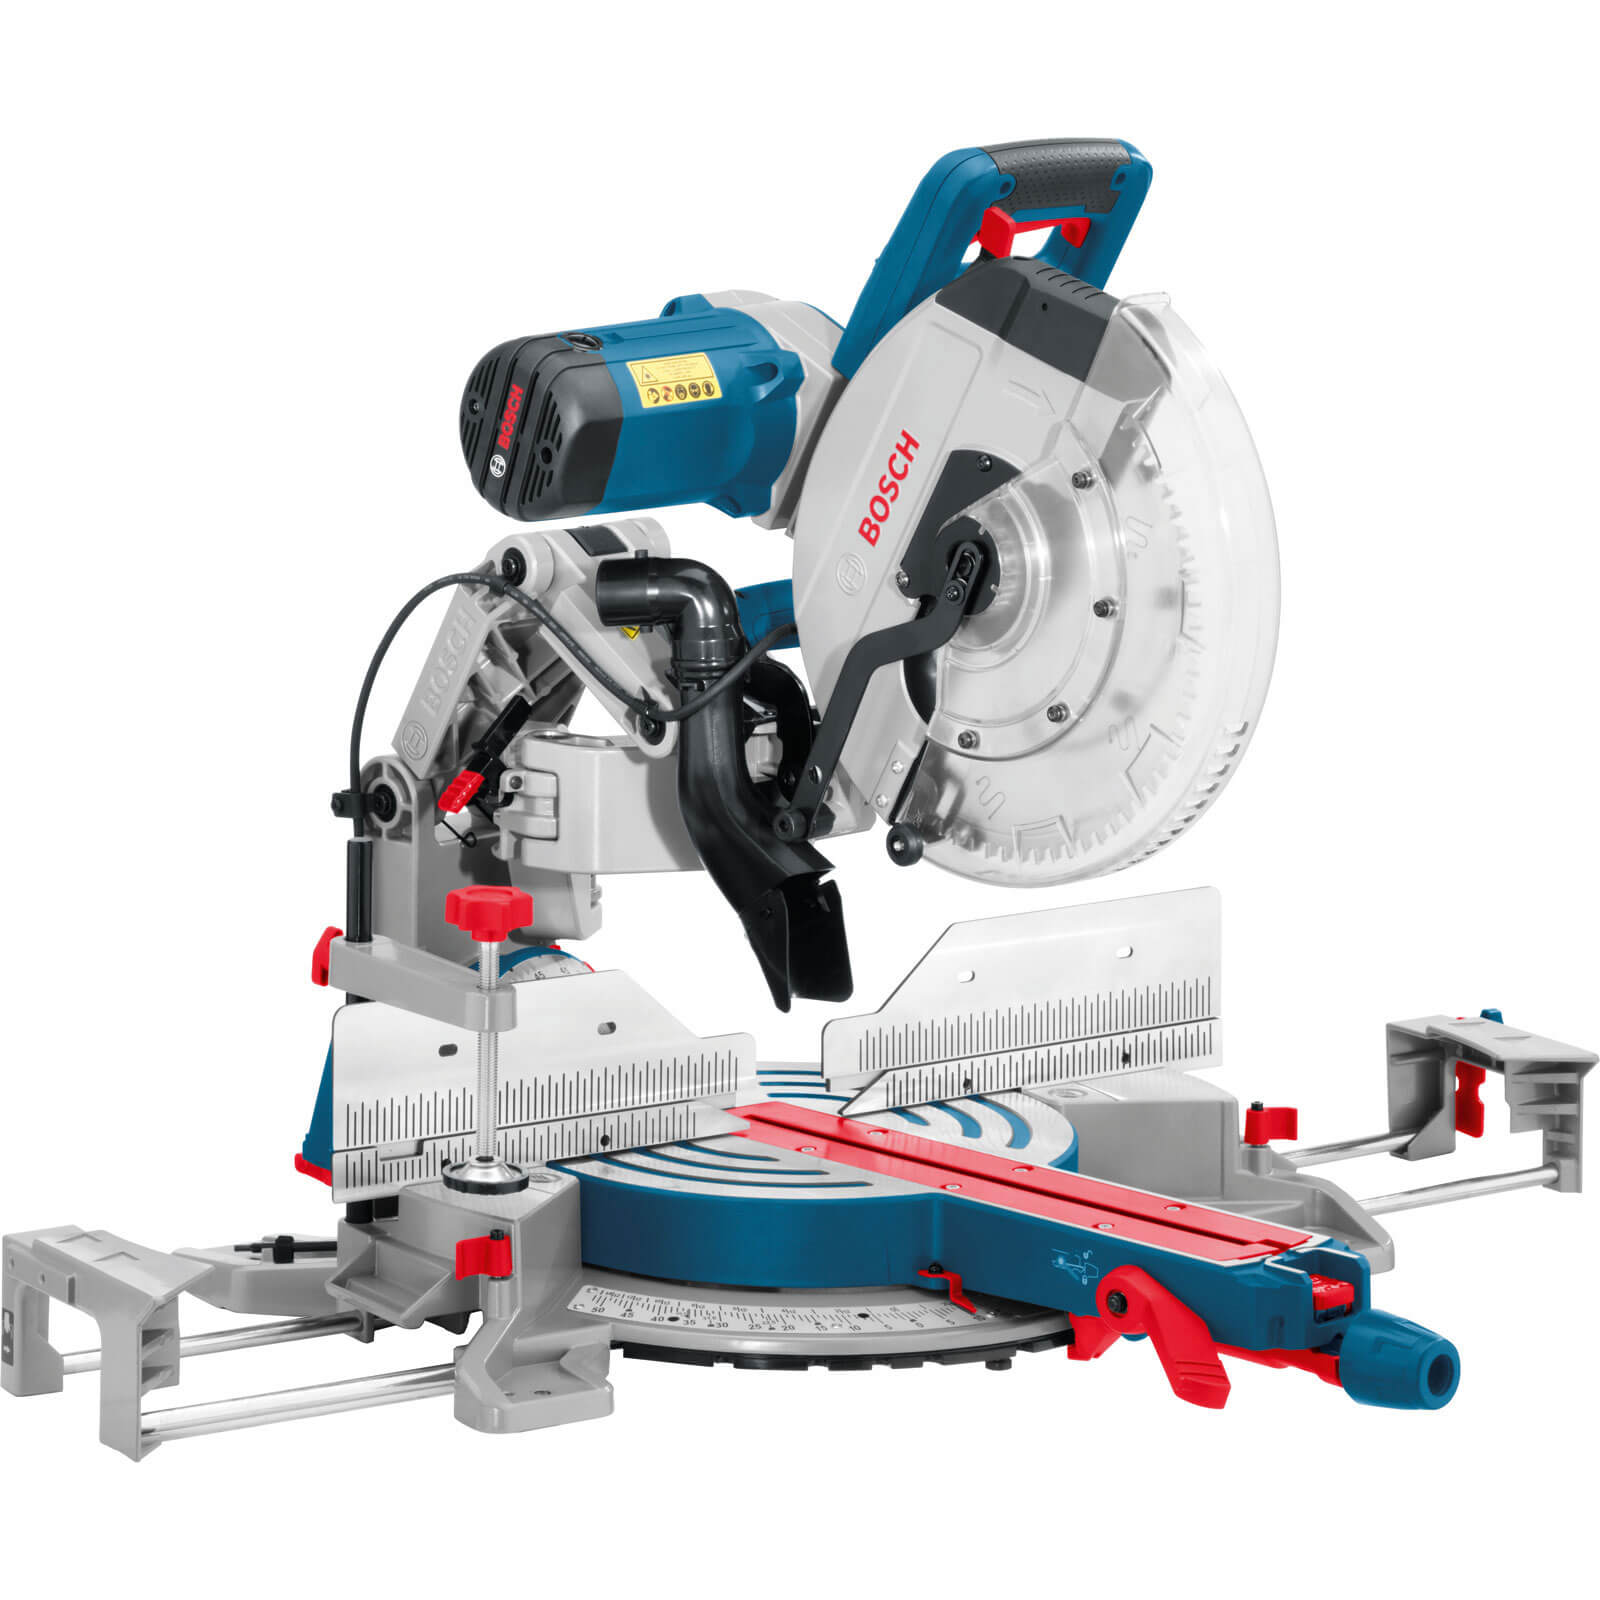 Bosch GCM 12 GDL 305mm Axial-Glide Mitre Saw